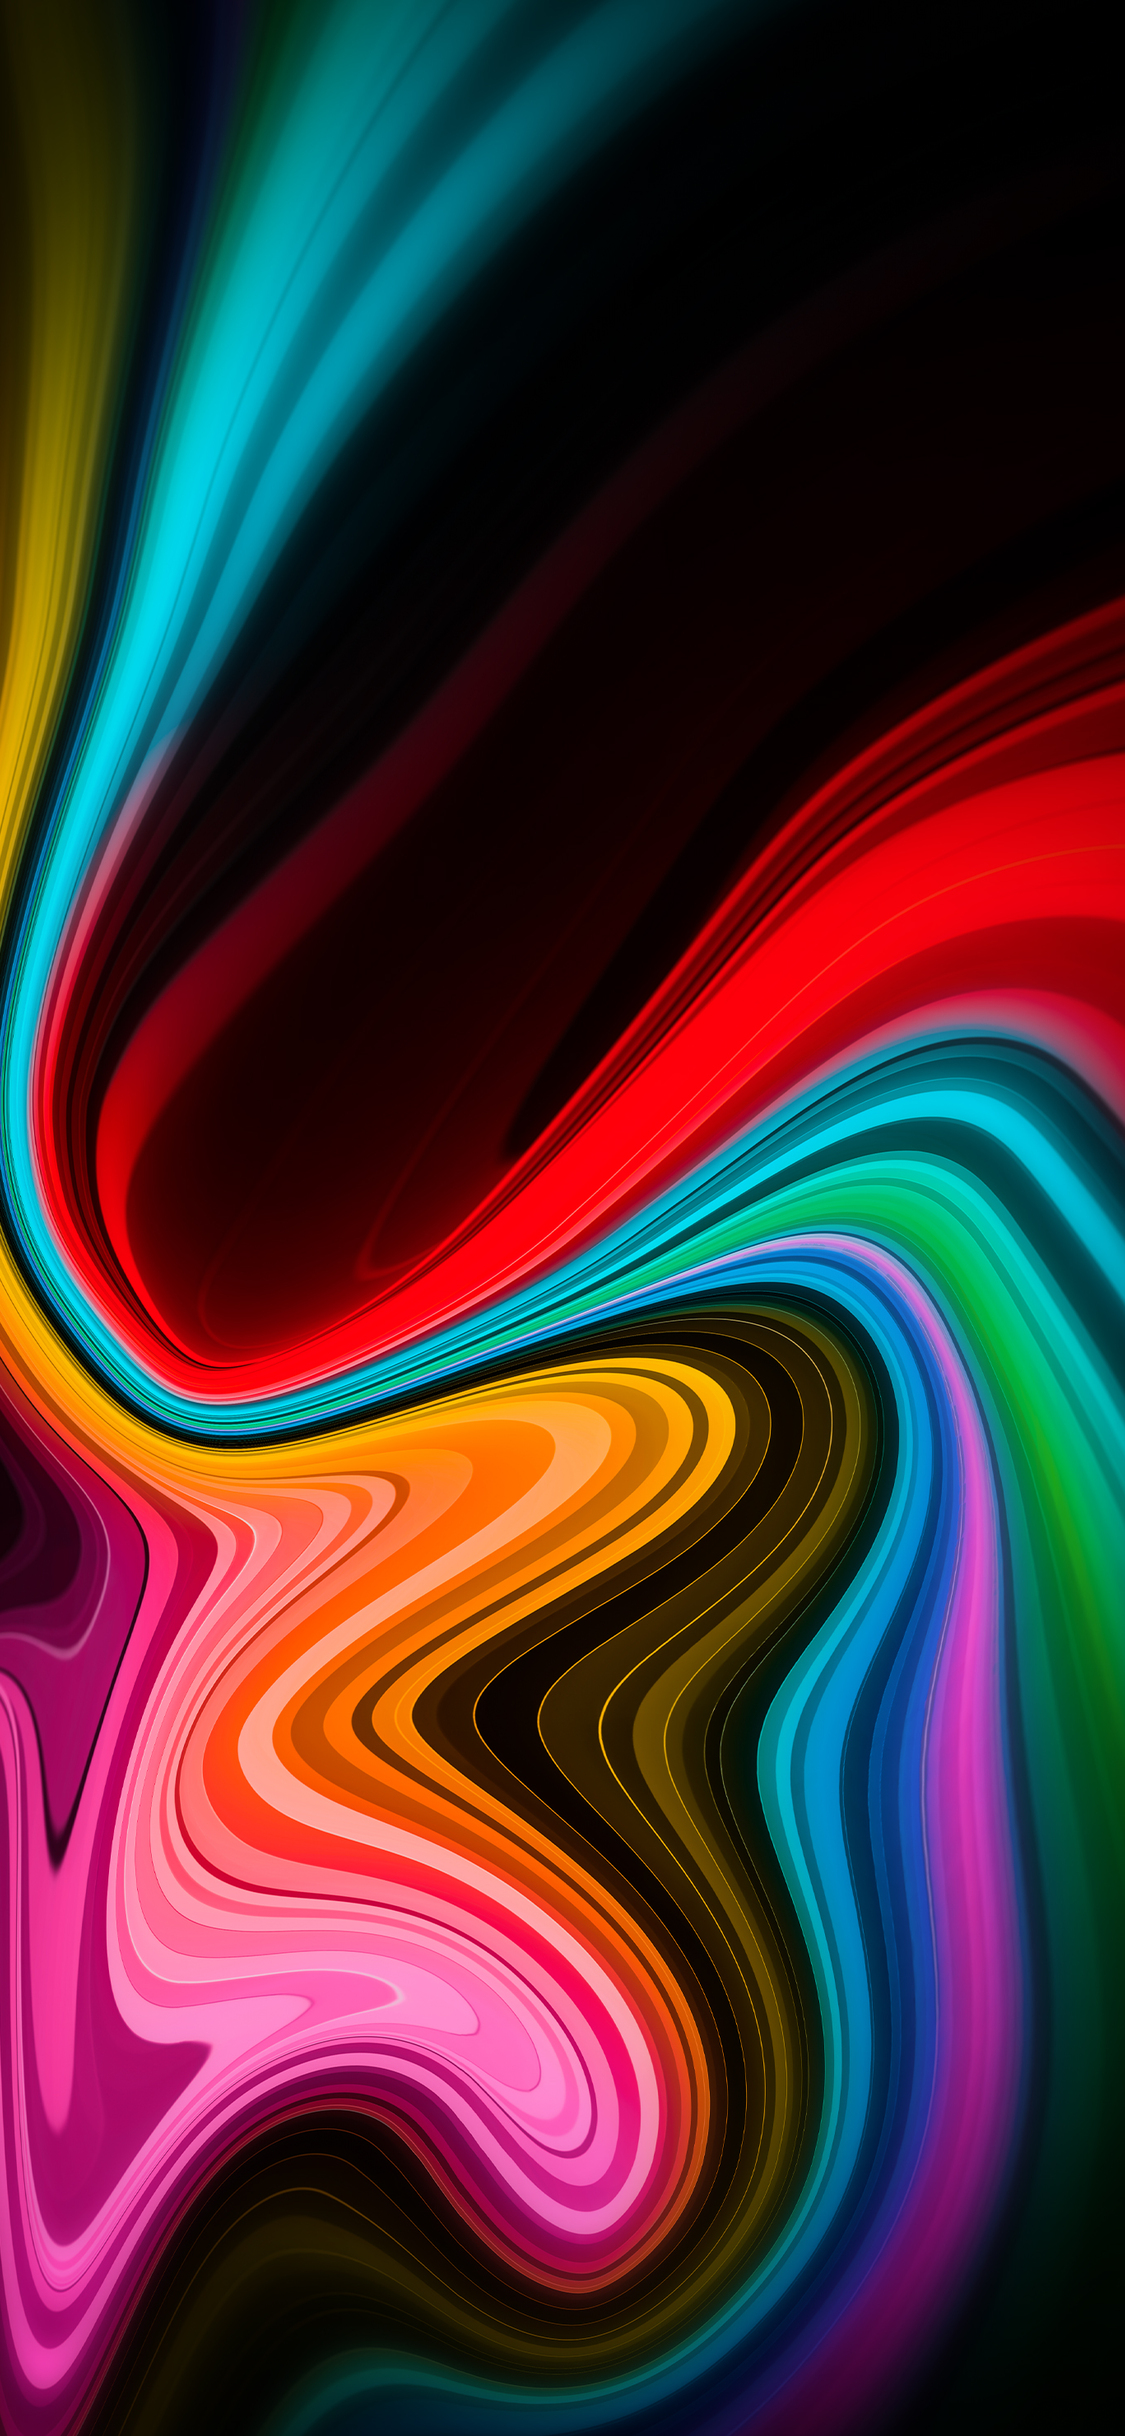 New Colors Formation Abstract 4k iPhone XS, iPhone iPhone X HD 4k Wallpaper, Image, Background, Photo and Picture